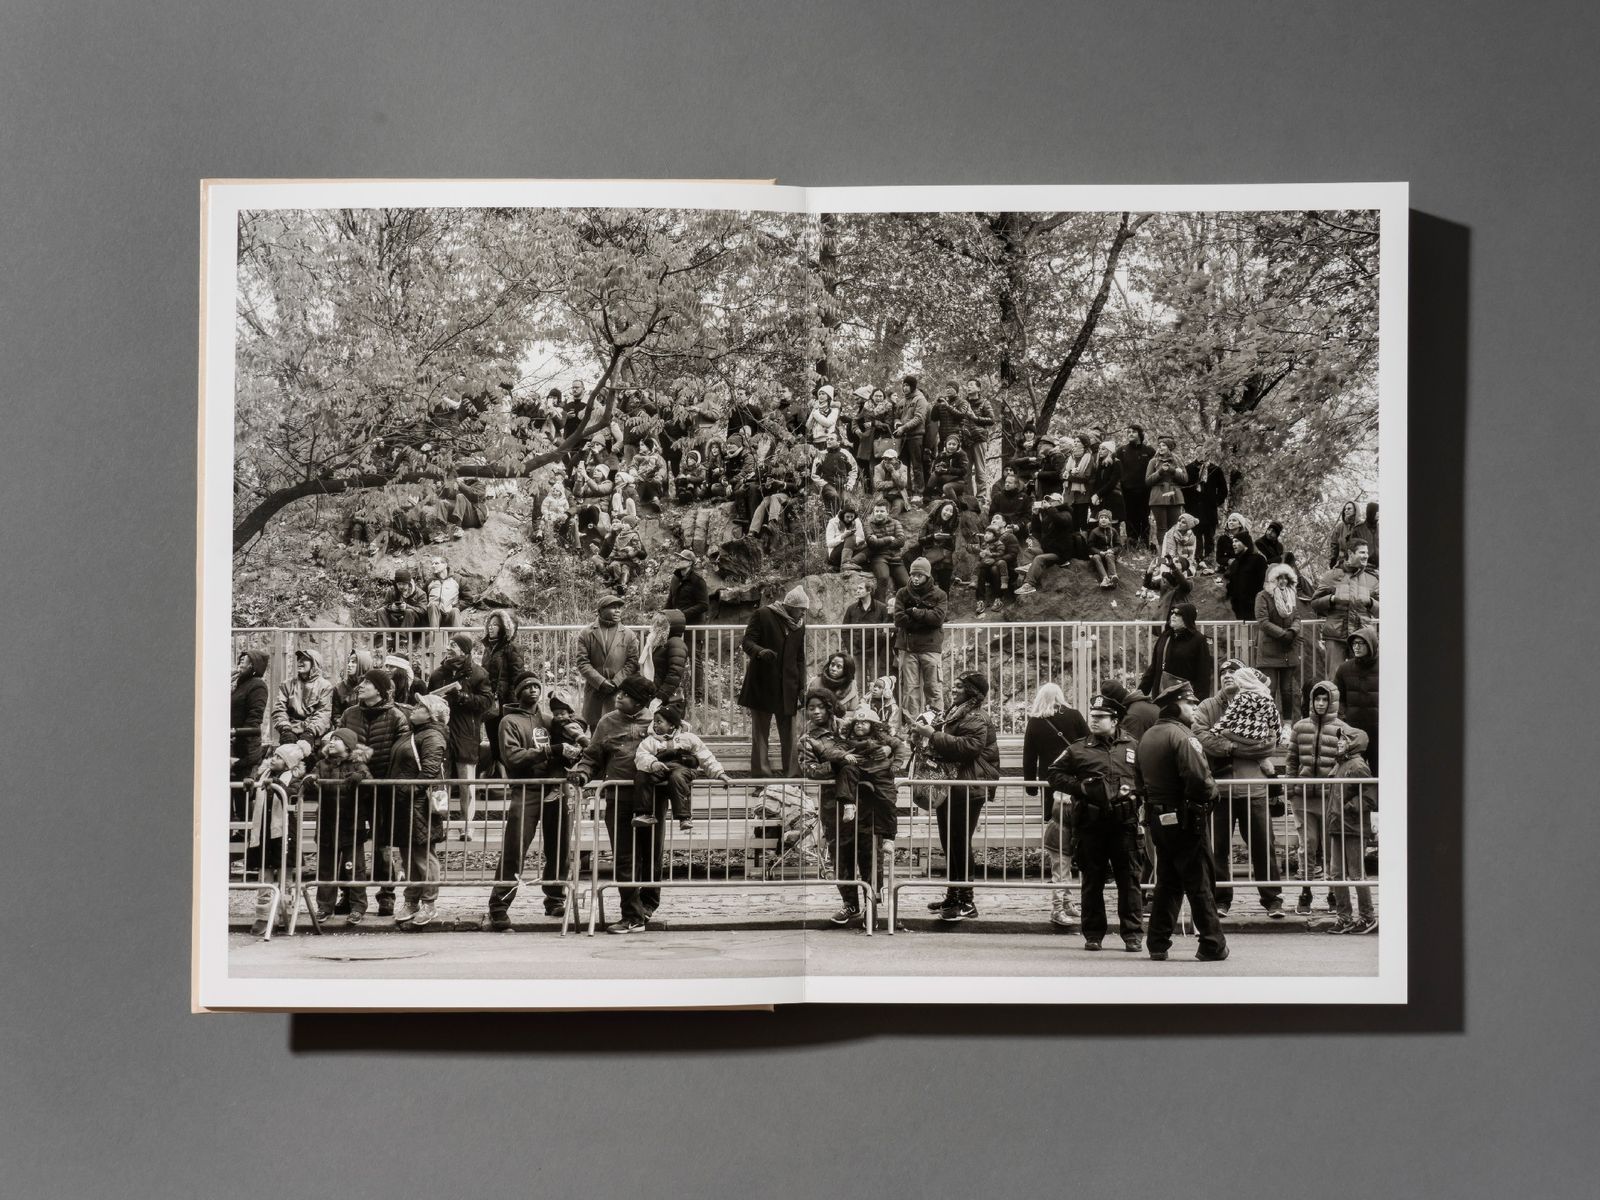 © George Georghiou, spread from the book Americans Parade